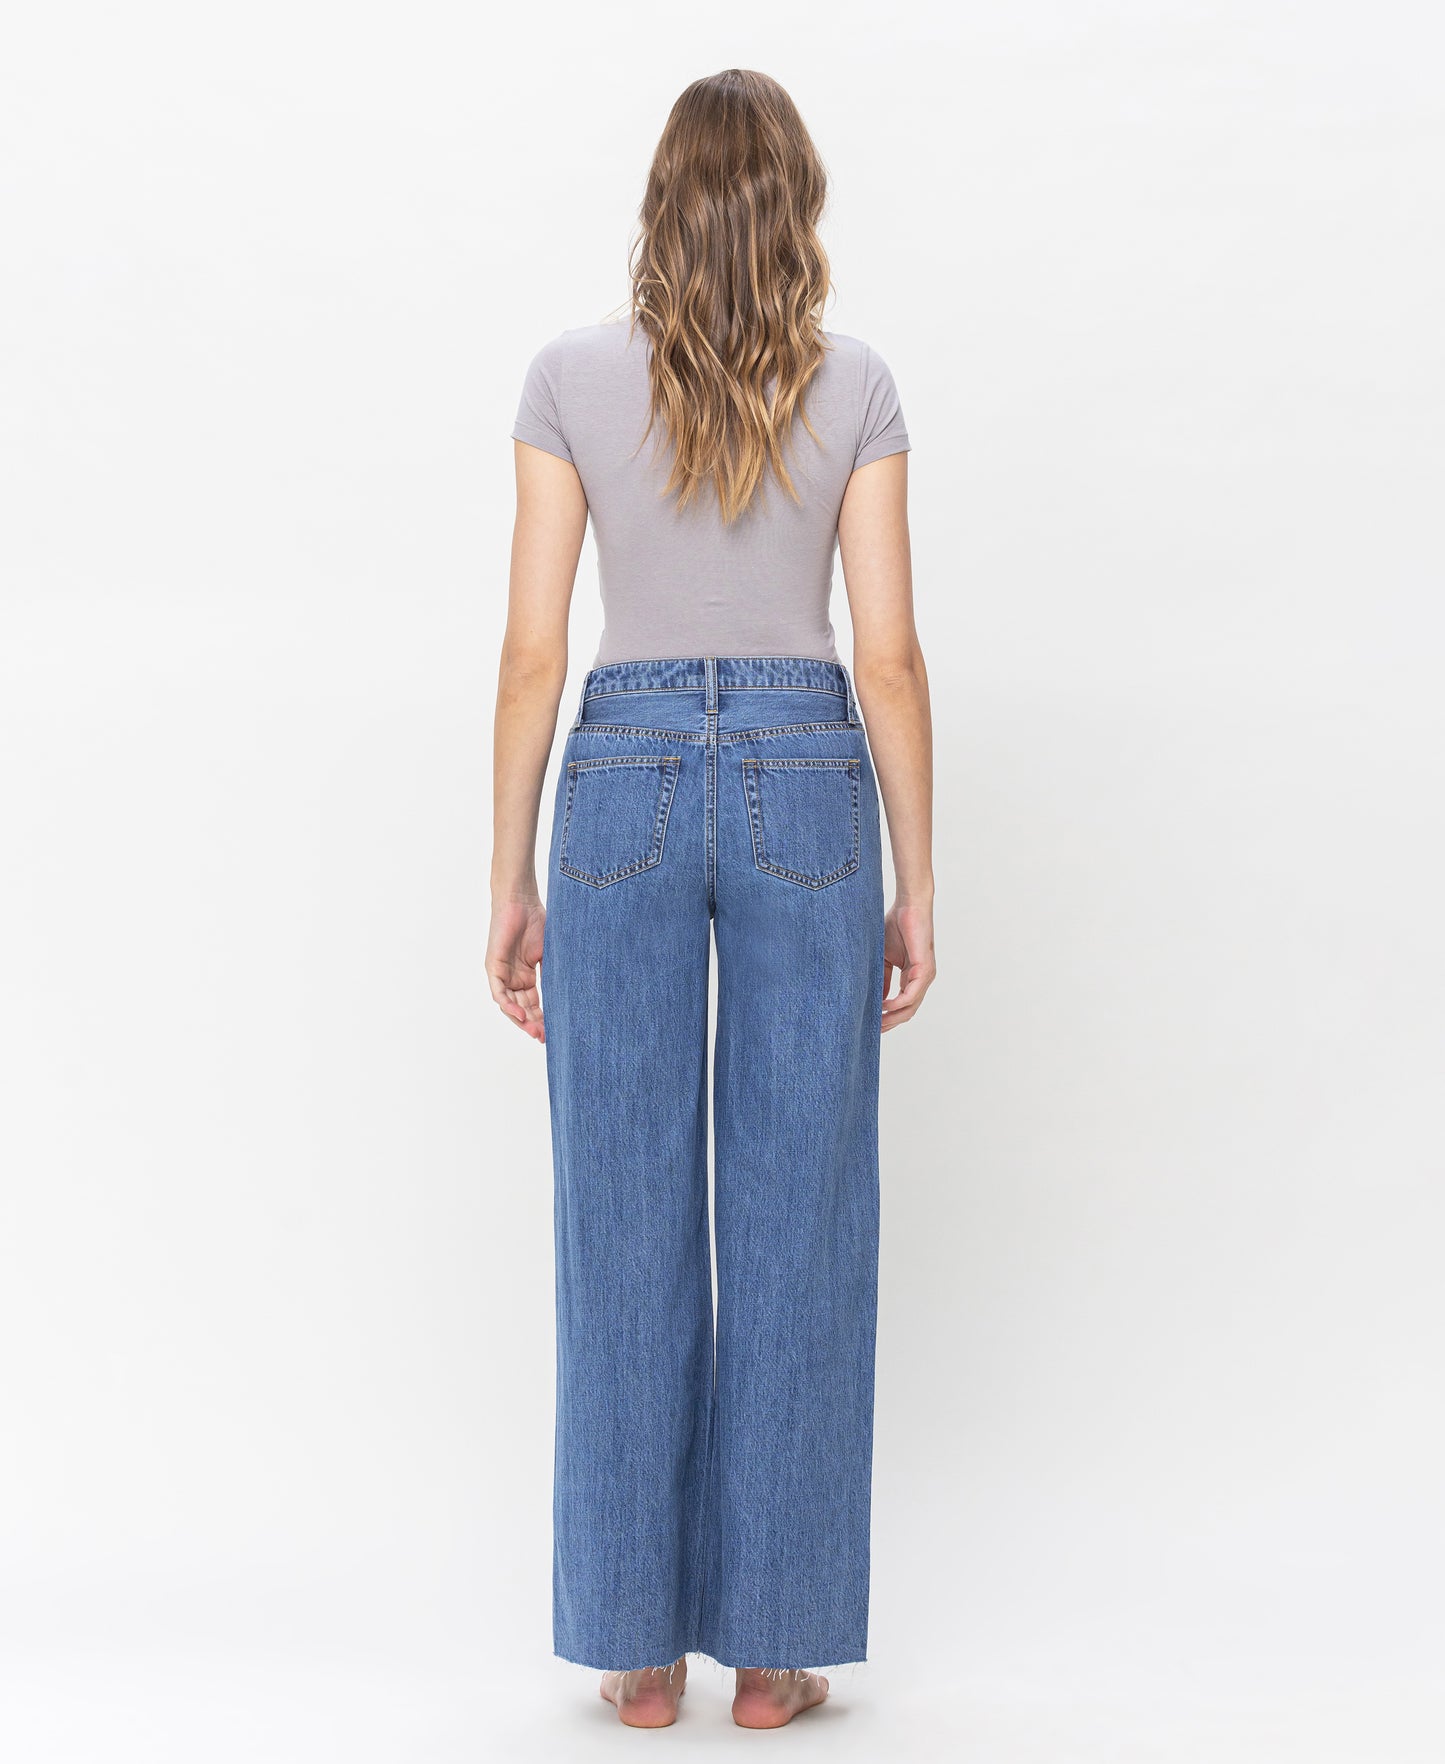 Back product images of Phenomenal - High Rise Wide Leg Jeans